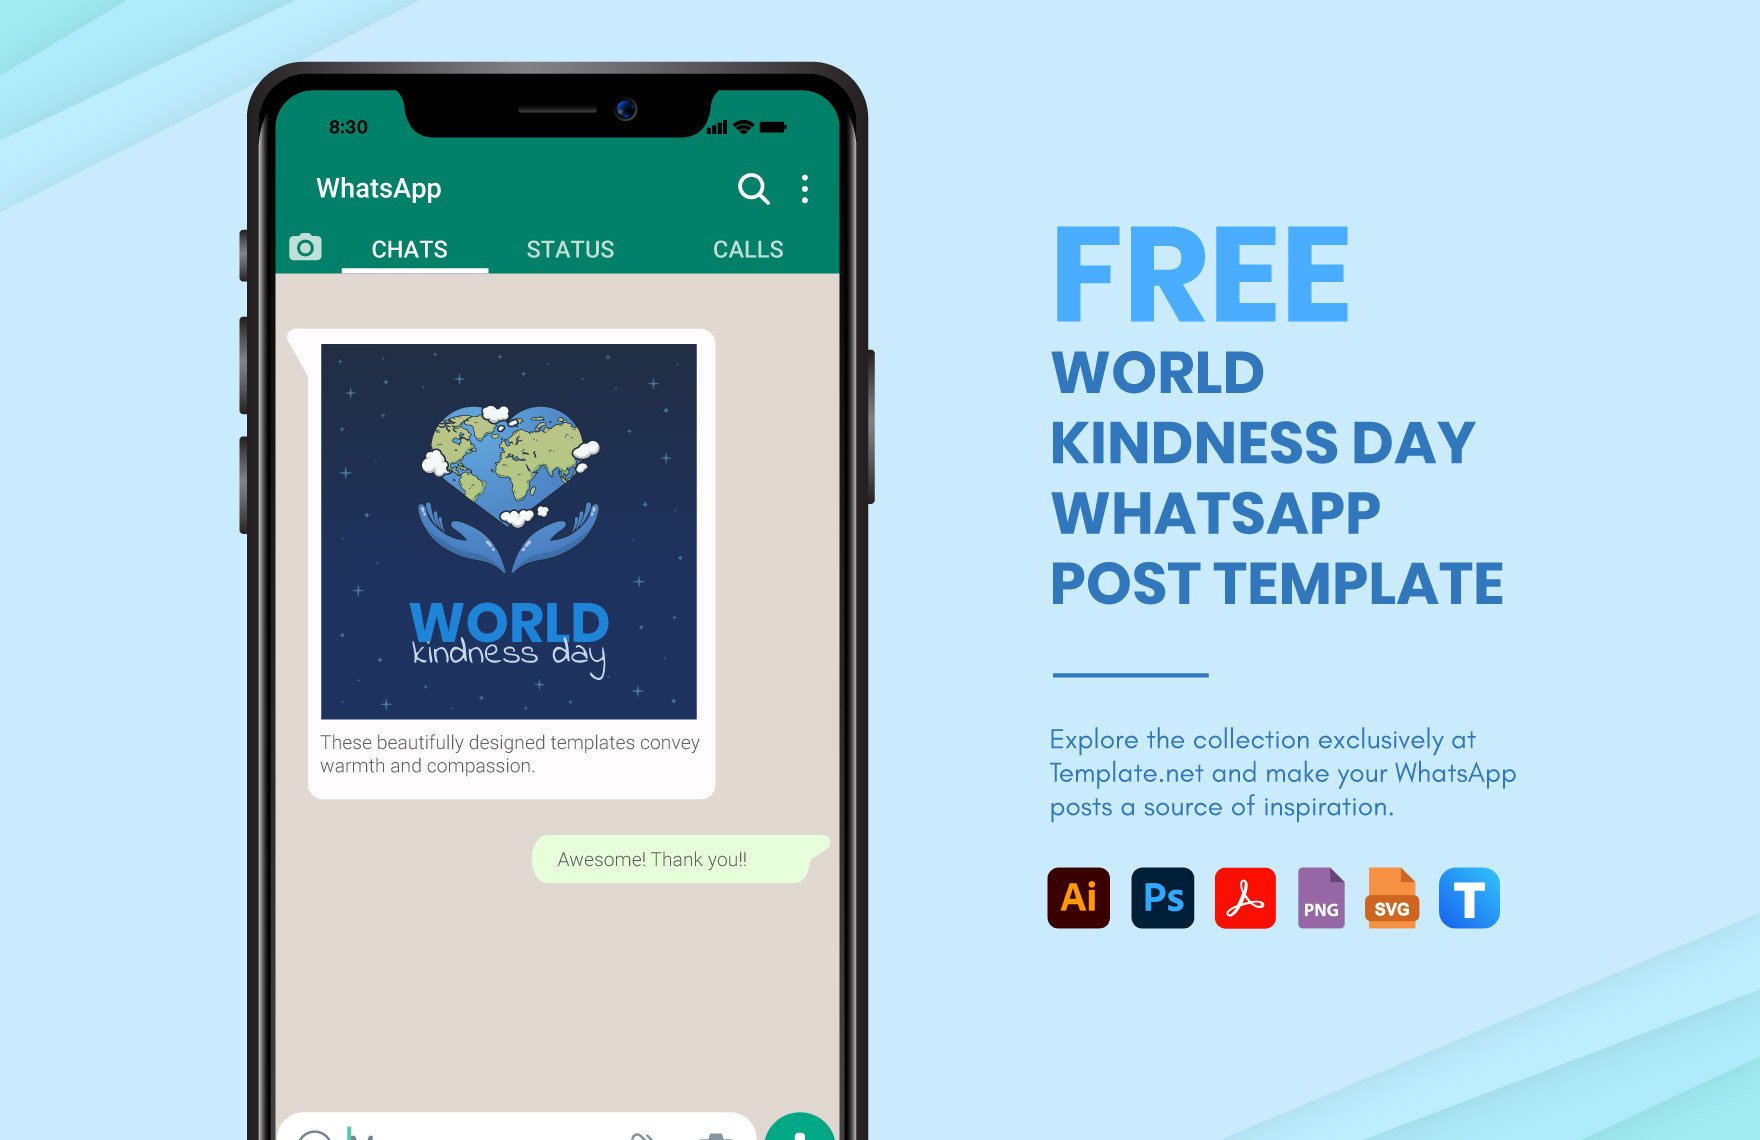 Free World Kindness Day WhatsApp Post Template in PDF, Illustrator, PSD, SVG, PNG